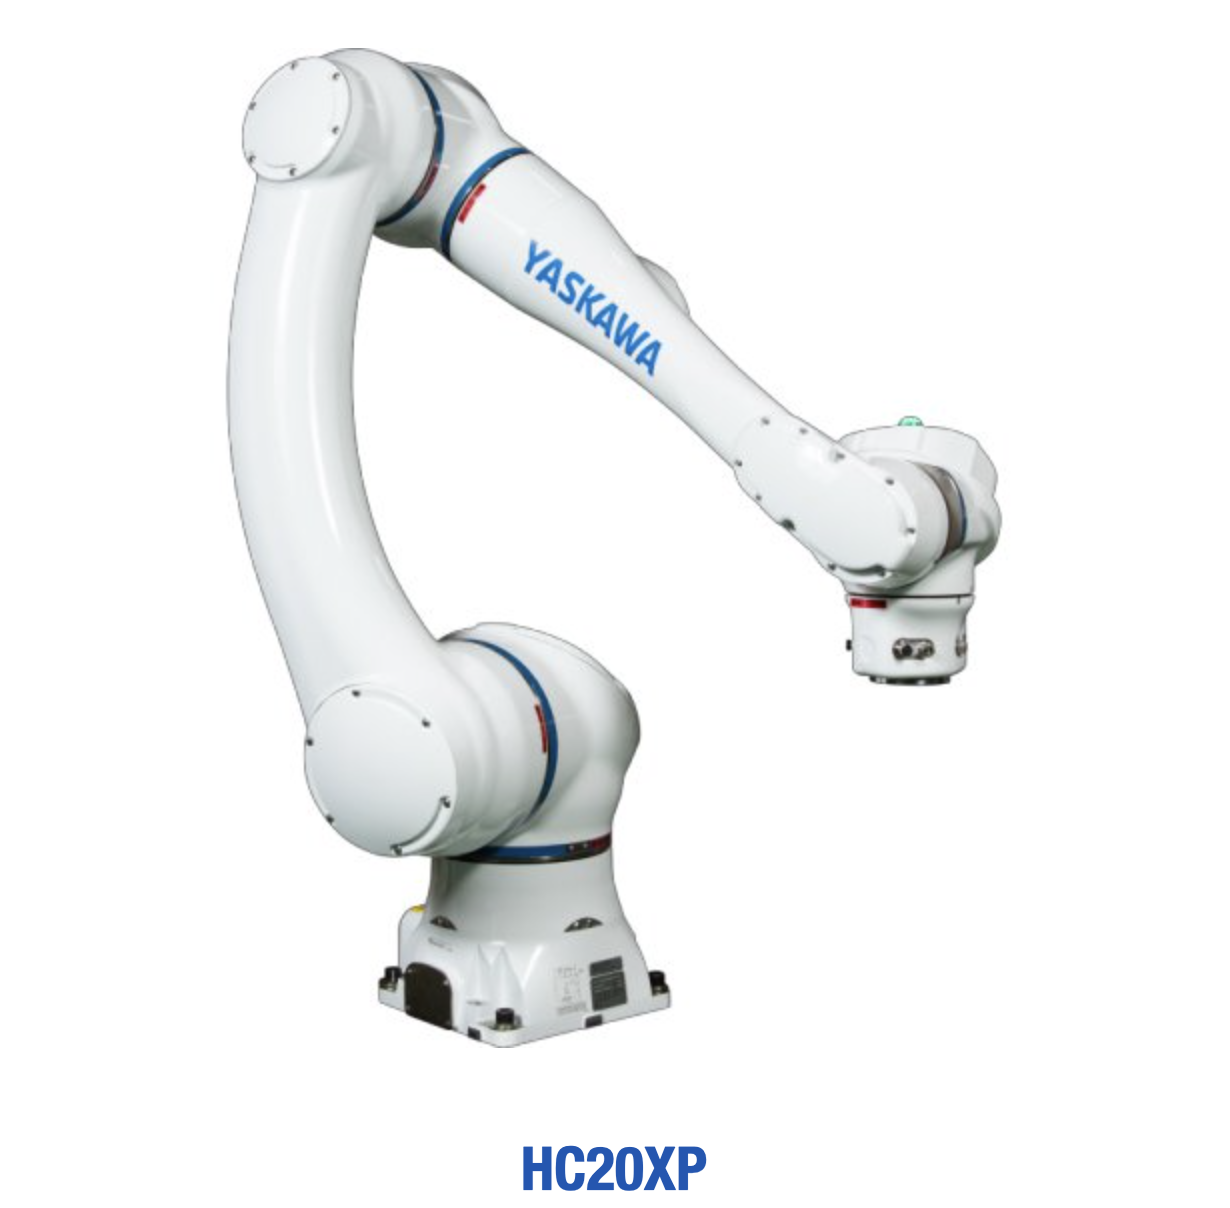 HC20XP : Easy-to-Clean Collaborative Robot with Hand-Guided Teaching  